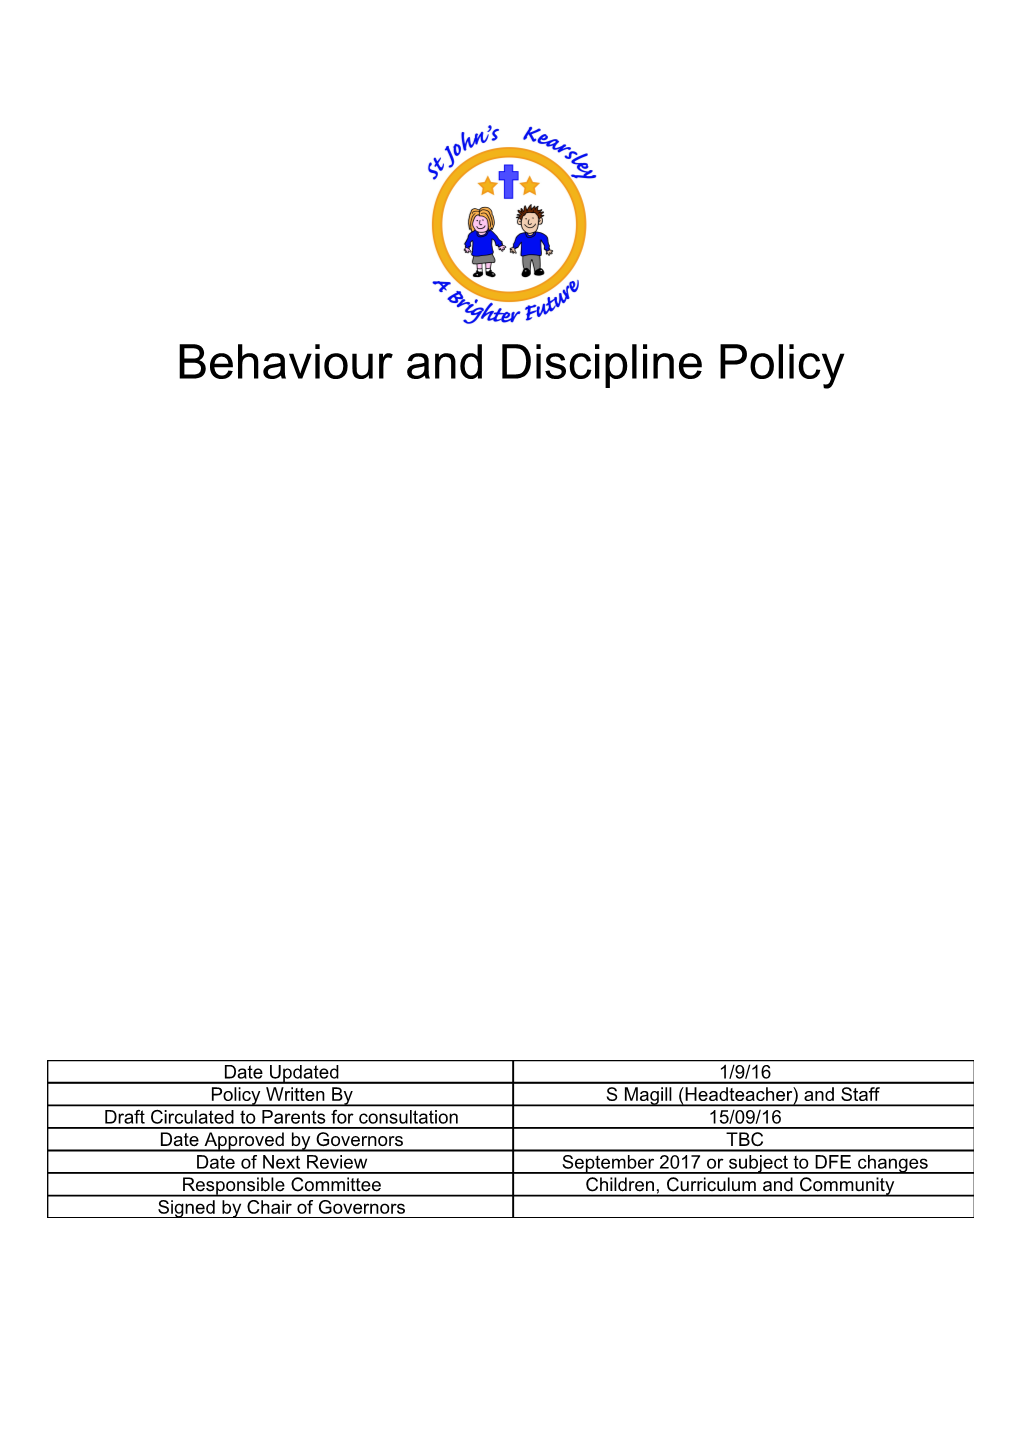 Behaviour and Discipline Policy s1